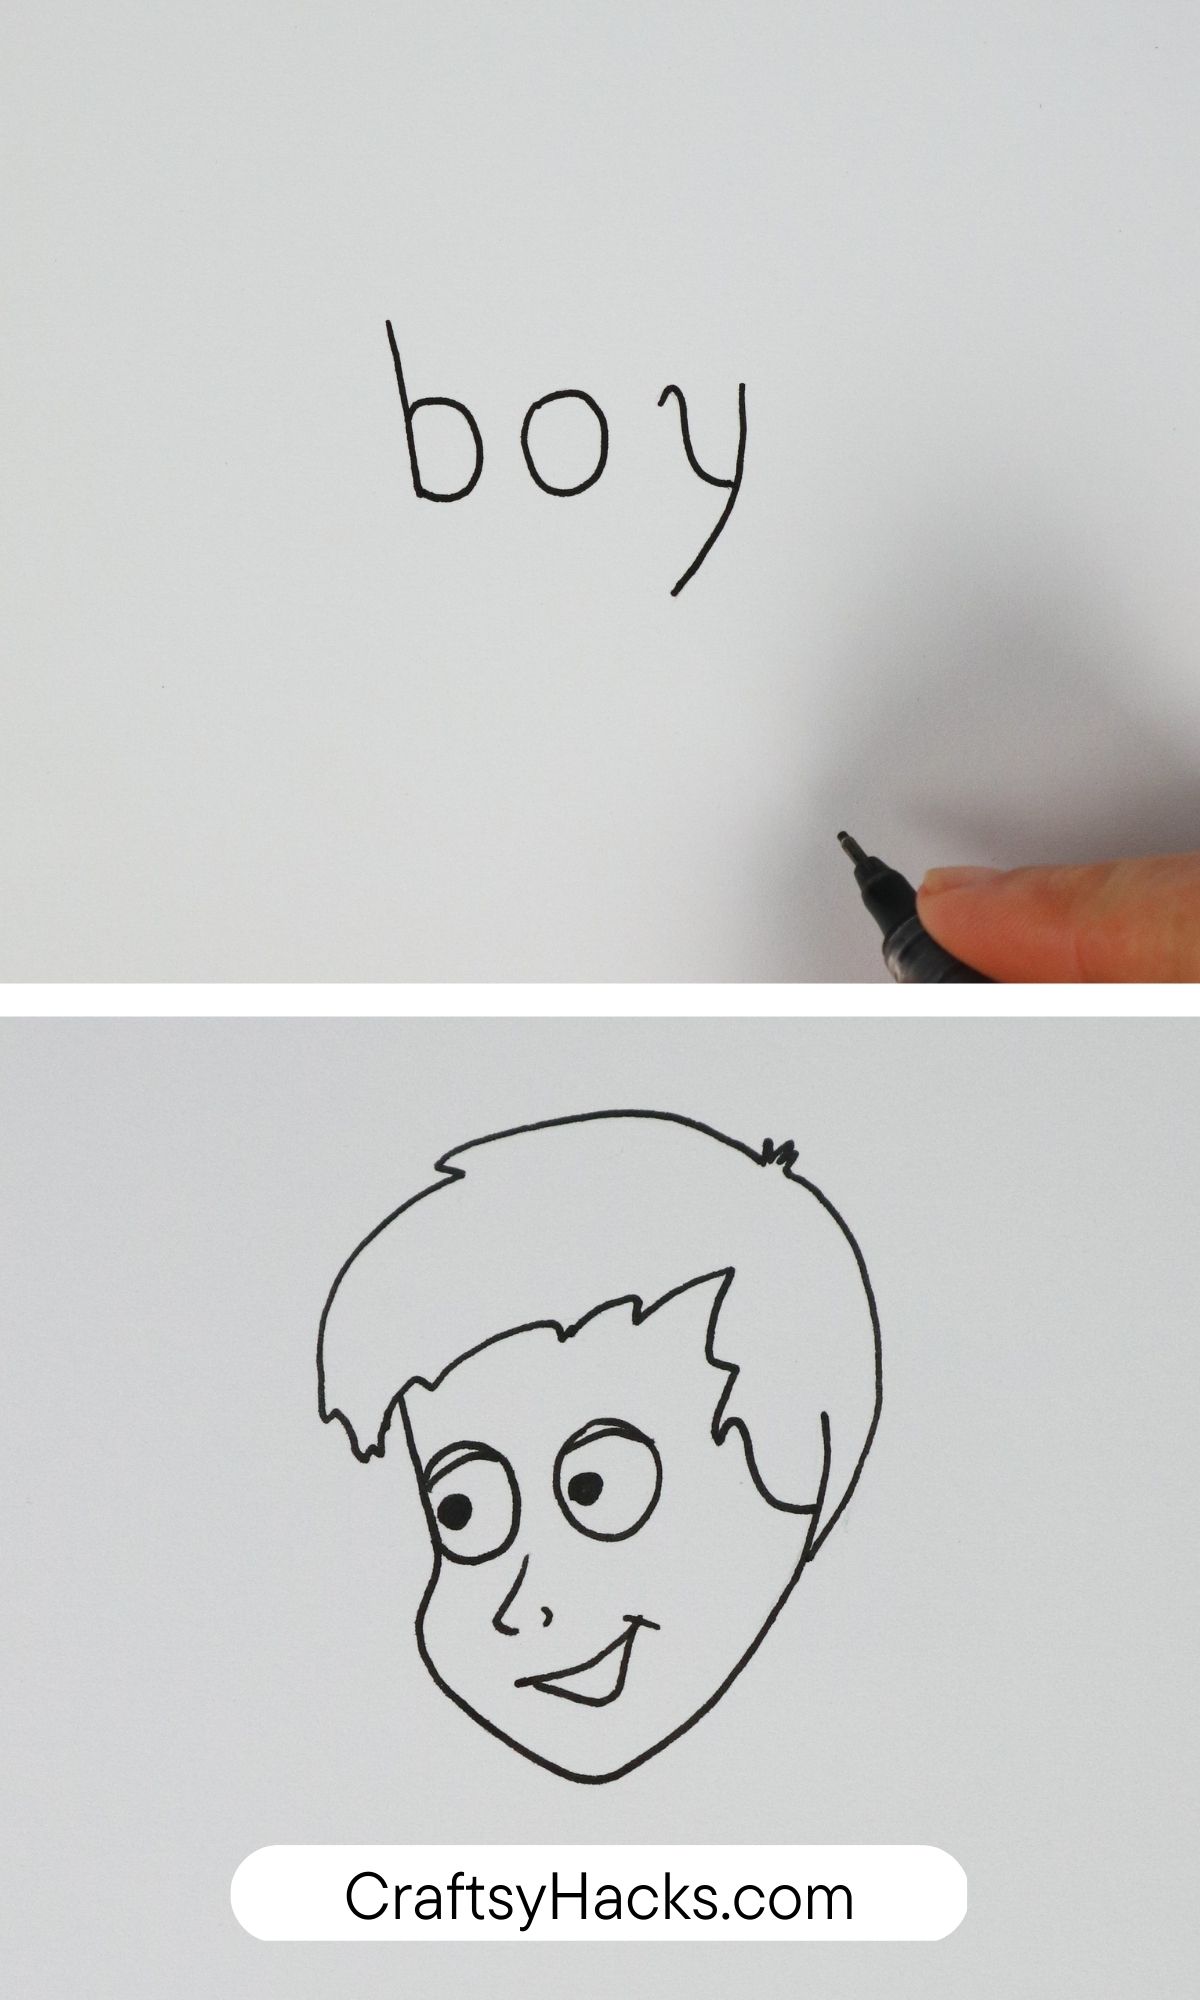 from letters 'b, o, y' to a boy's face drawing